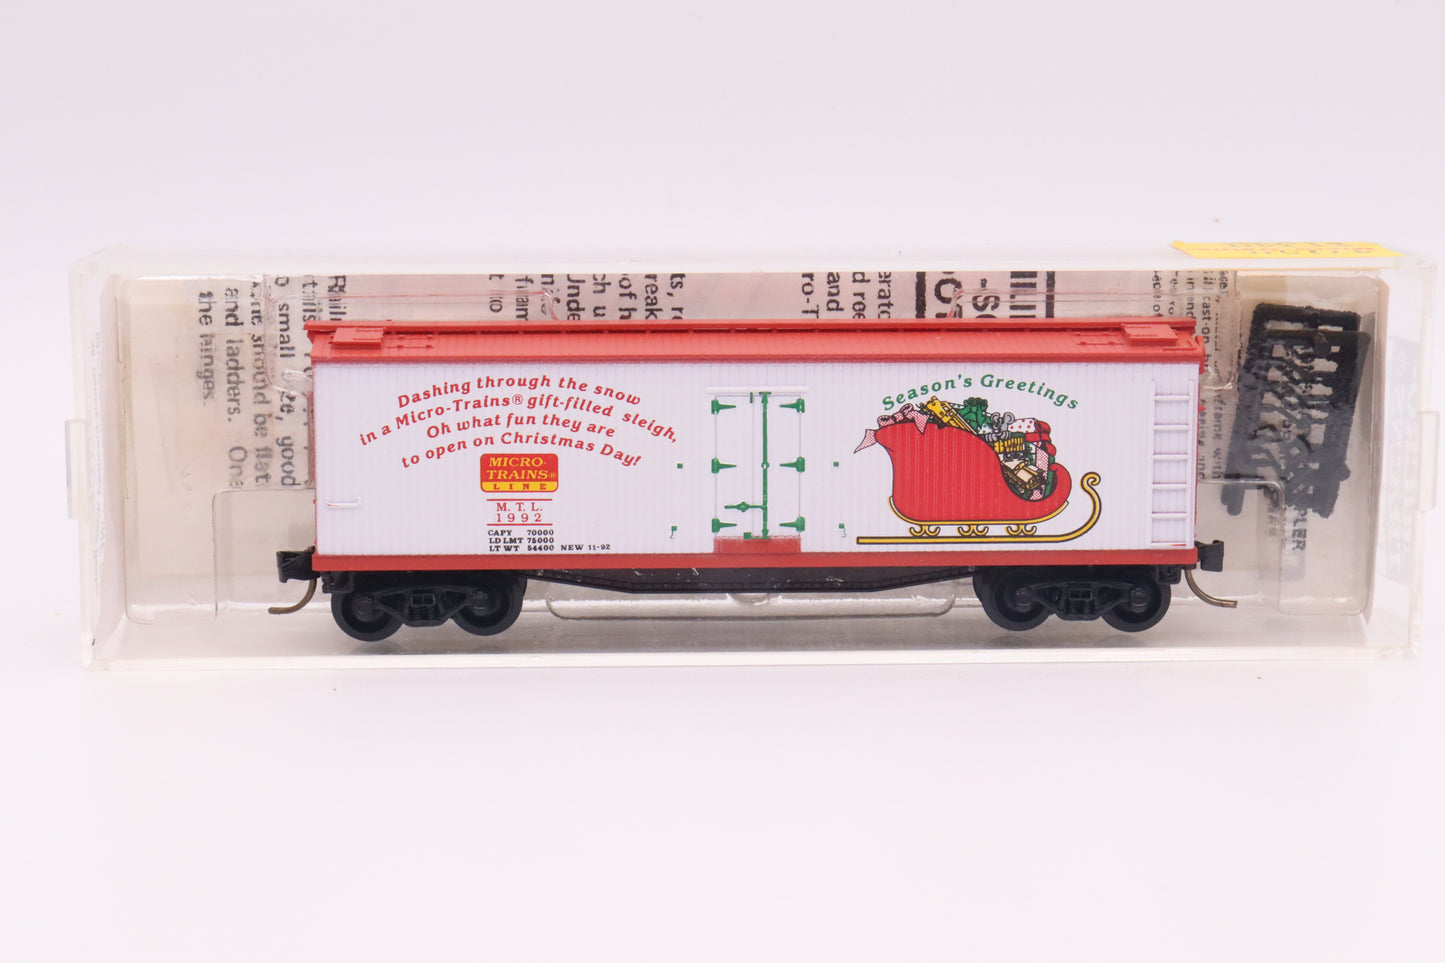 MTL-47150 - 40' Double-Sheathed Wood Reefer - Micro-Trains Holiday Car 1992 - MTL-1992